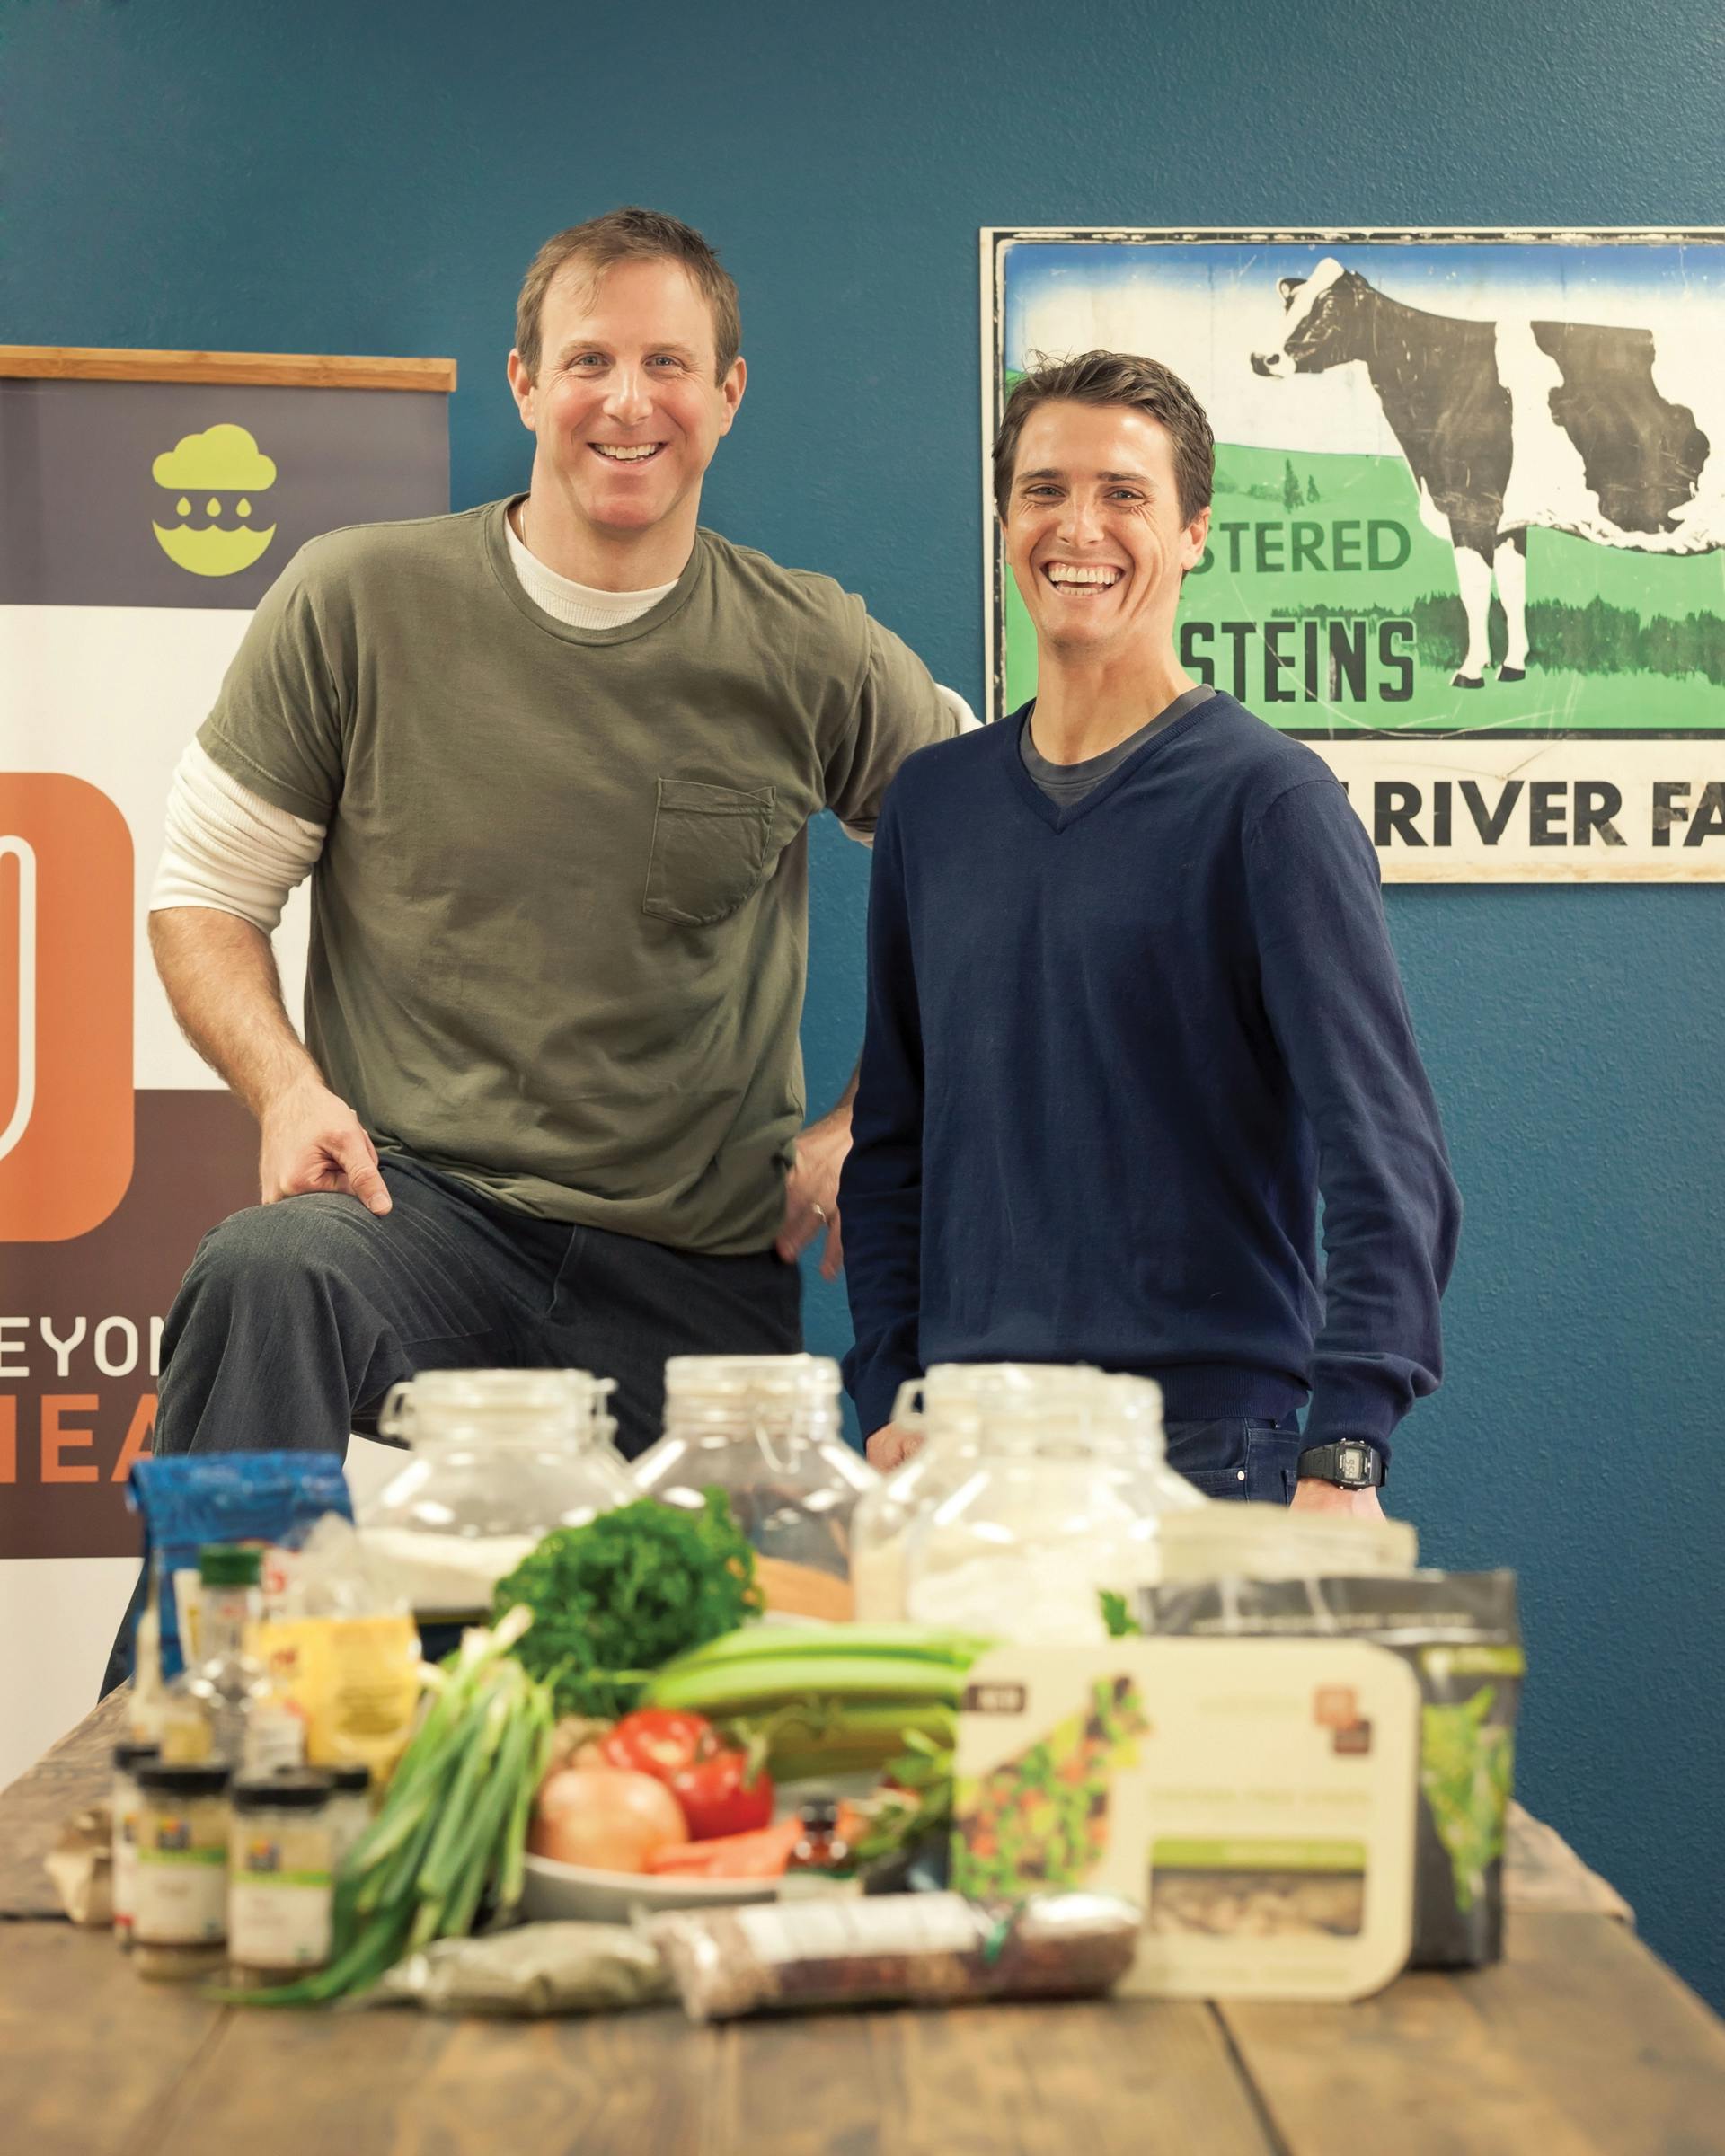 <p>Ethan Brown and Brent Taylor co-founded Beyond Meat, a line of plant protein products that mimic the taste and texture of animal-based proteins, in El Segundo, Calif.</p>
